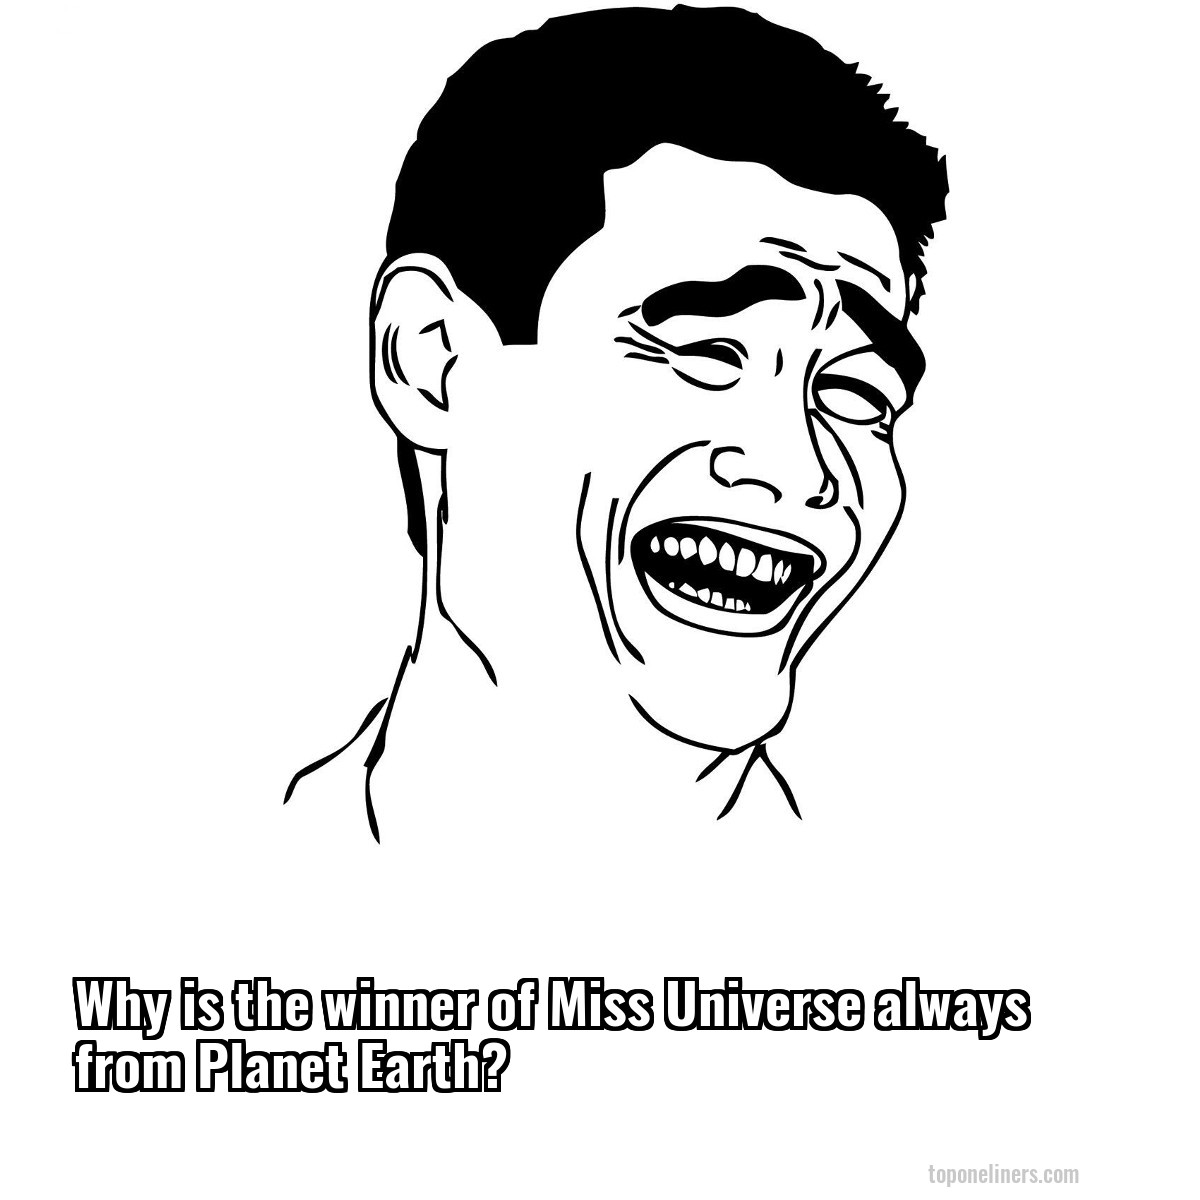 Why is the winner of Miss Universe always from Planet Earth?